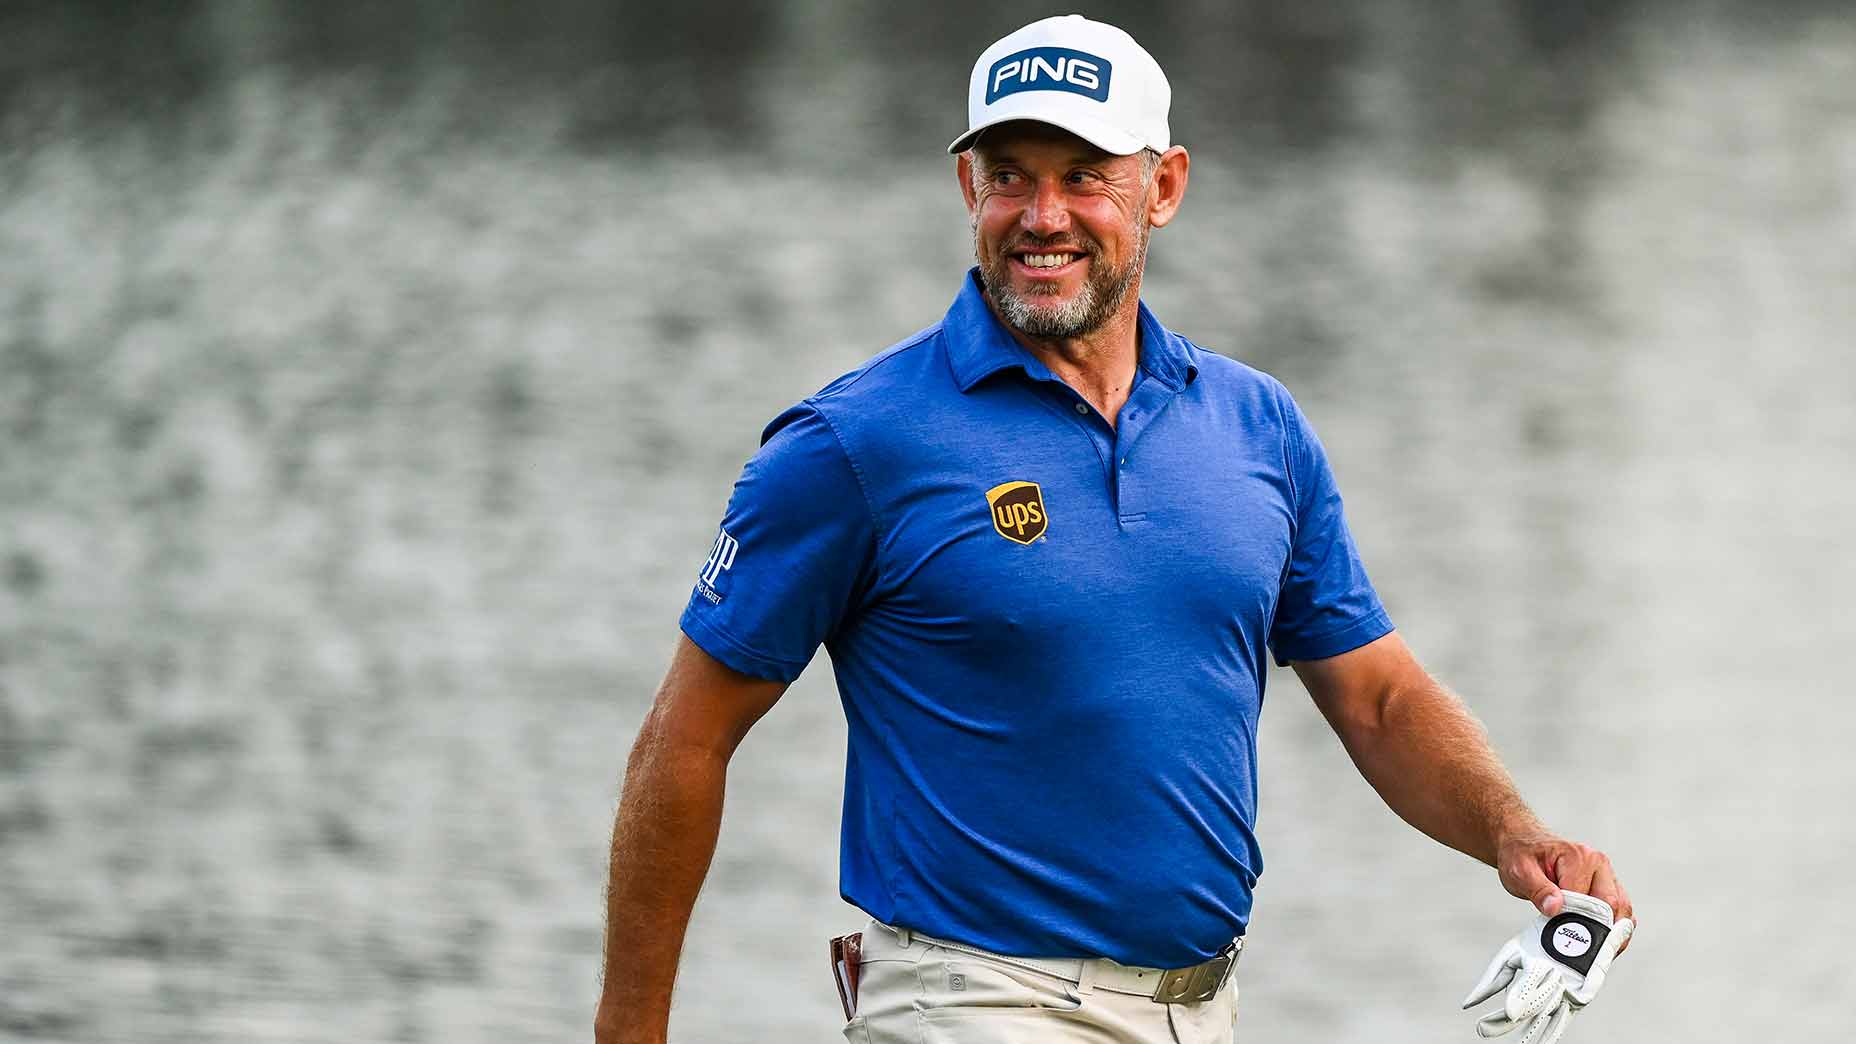 Lee Westwood's latest close call? His son beat him at Augusta National